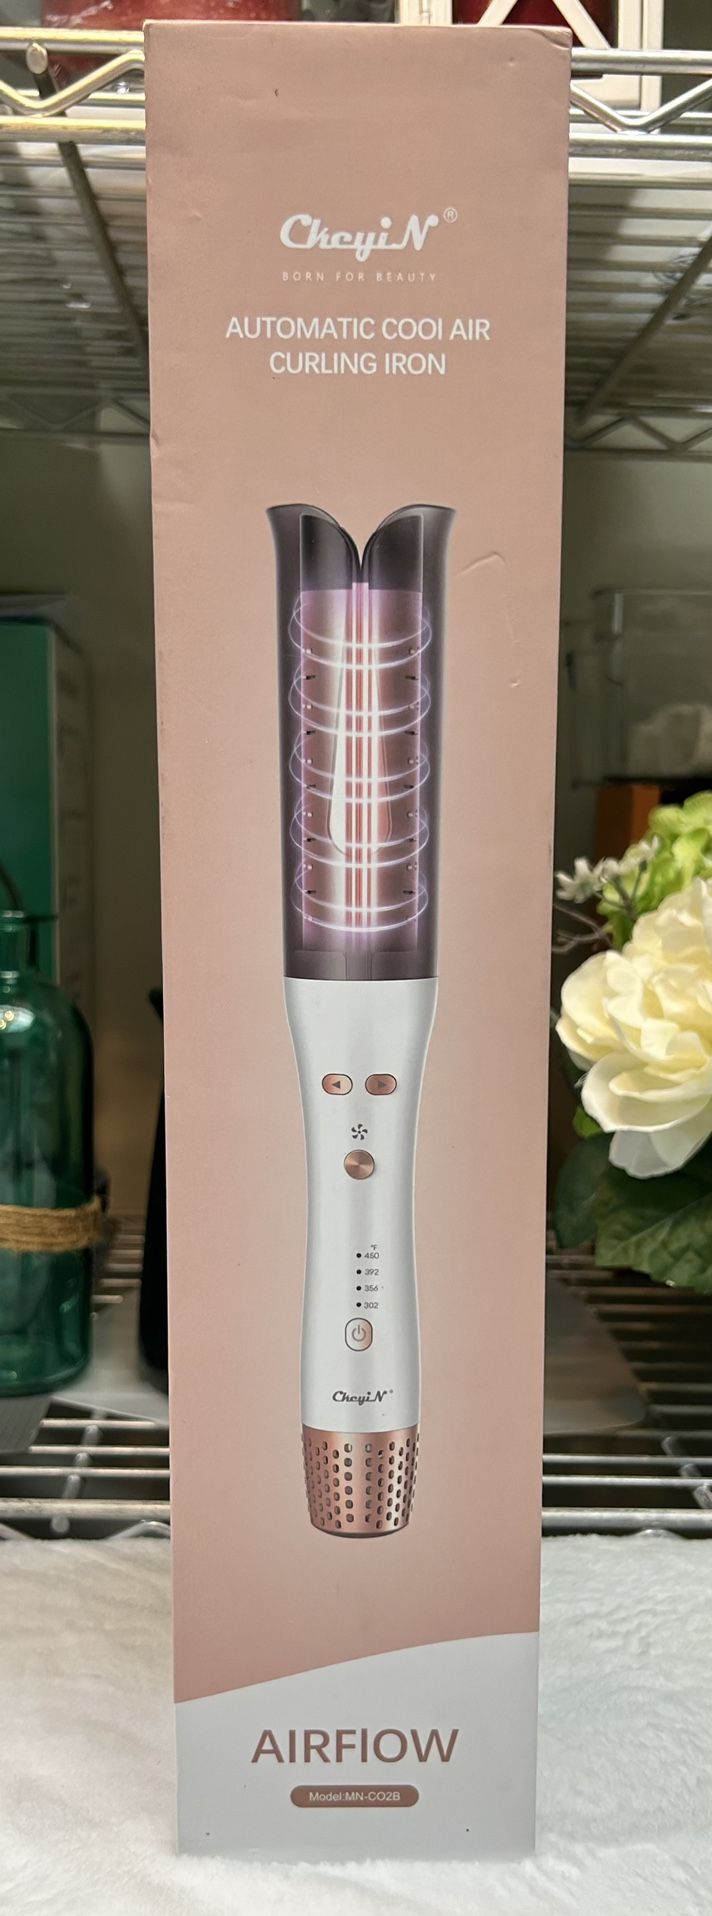 Automatic, cool air Curling Iron NEW